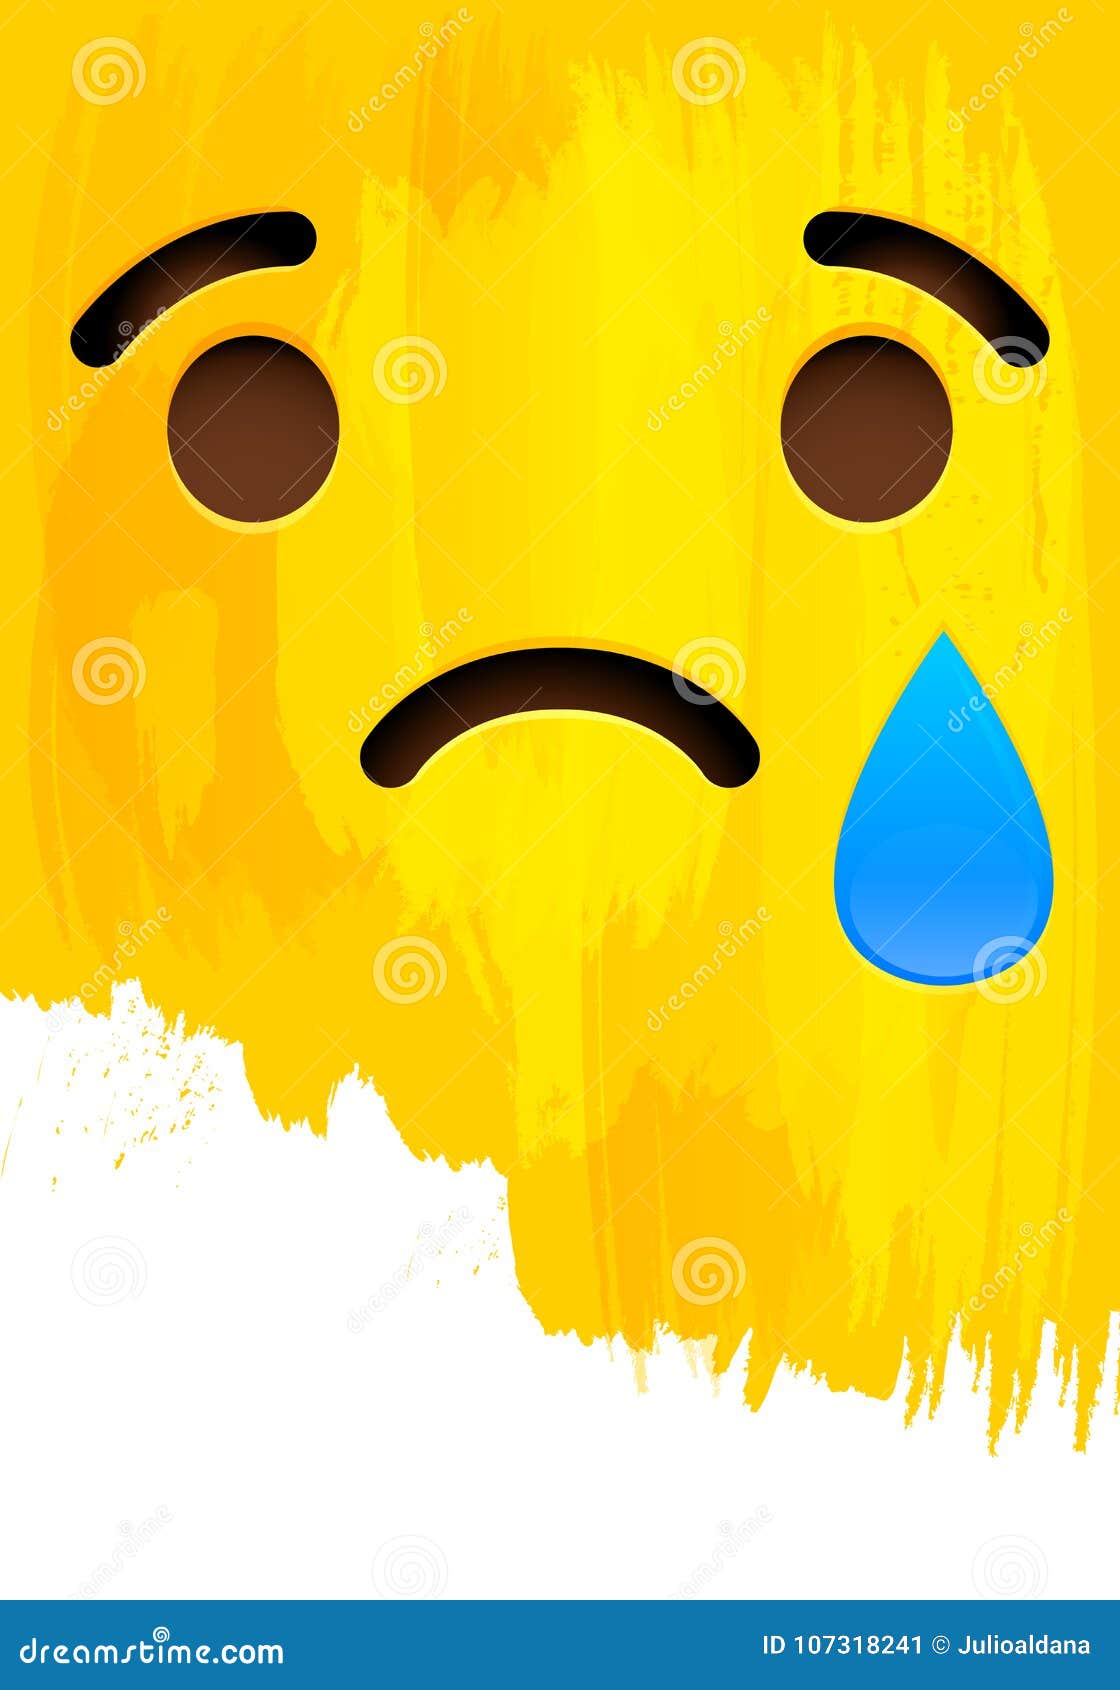 Crying Sad Smiley Face on Yellow Paint Wall Stock Vector ...